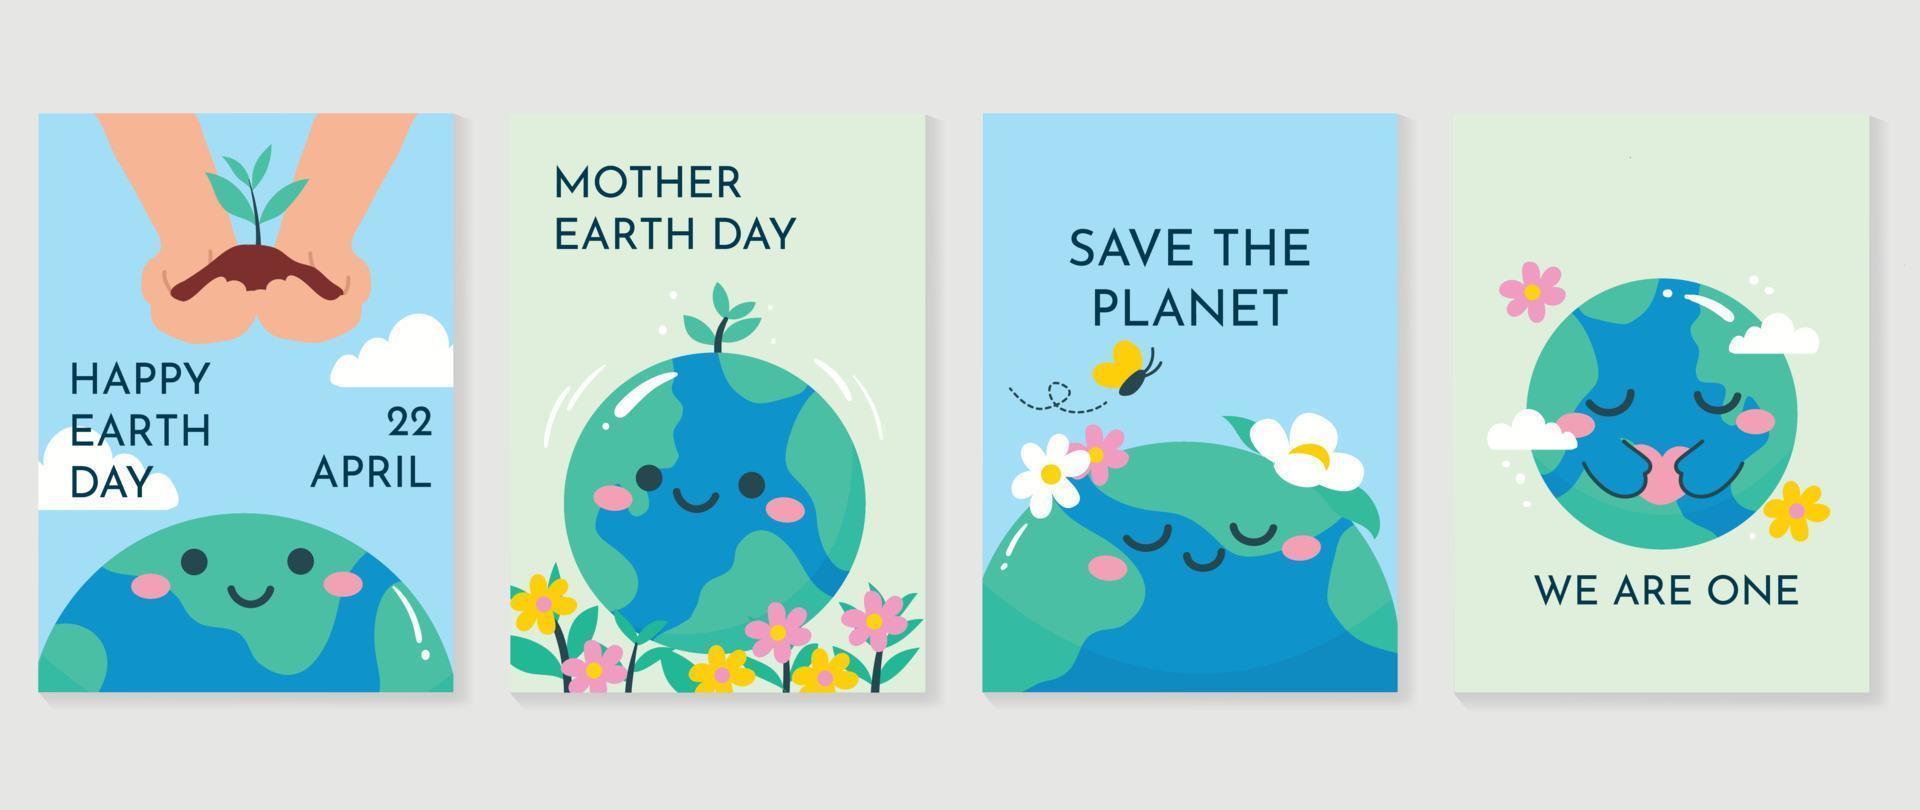 Happy Earth day concept, 22 April, cover vector. Save the earth, globe, plant trees, flower garden, cloud. Eco friendly illustration design for web, banner, campaign, social media post. vector